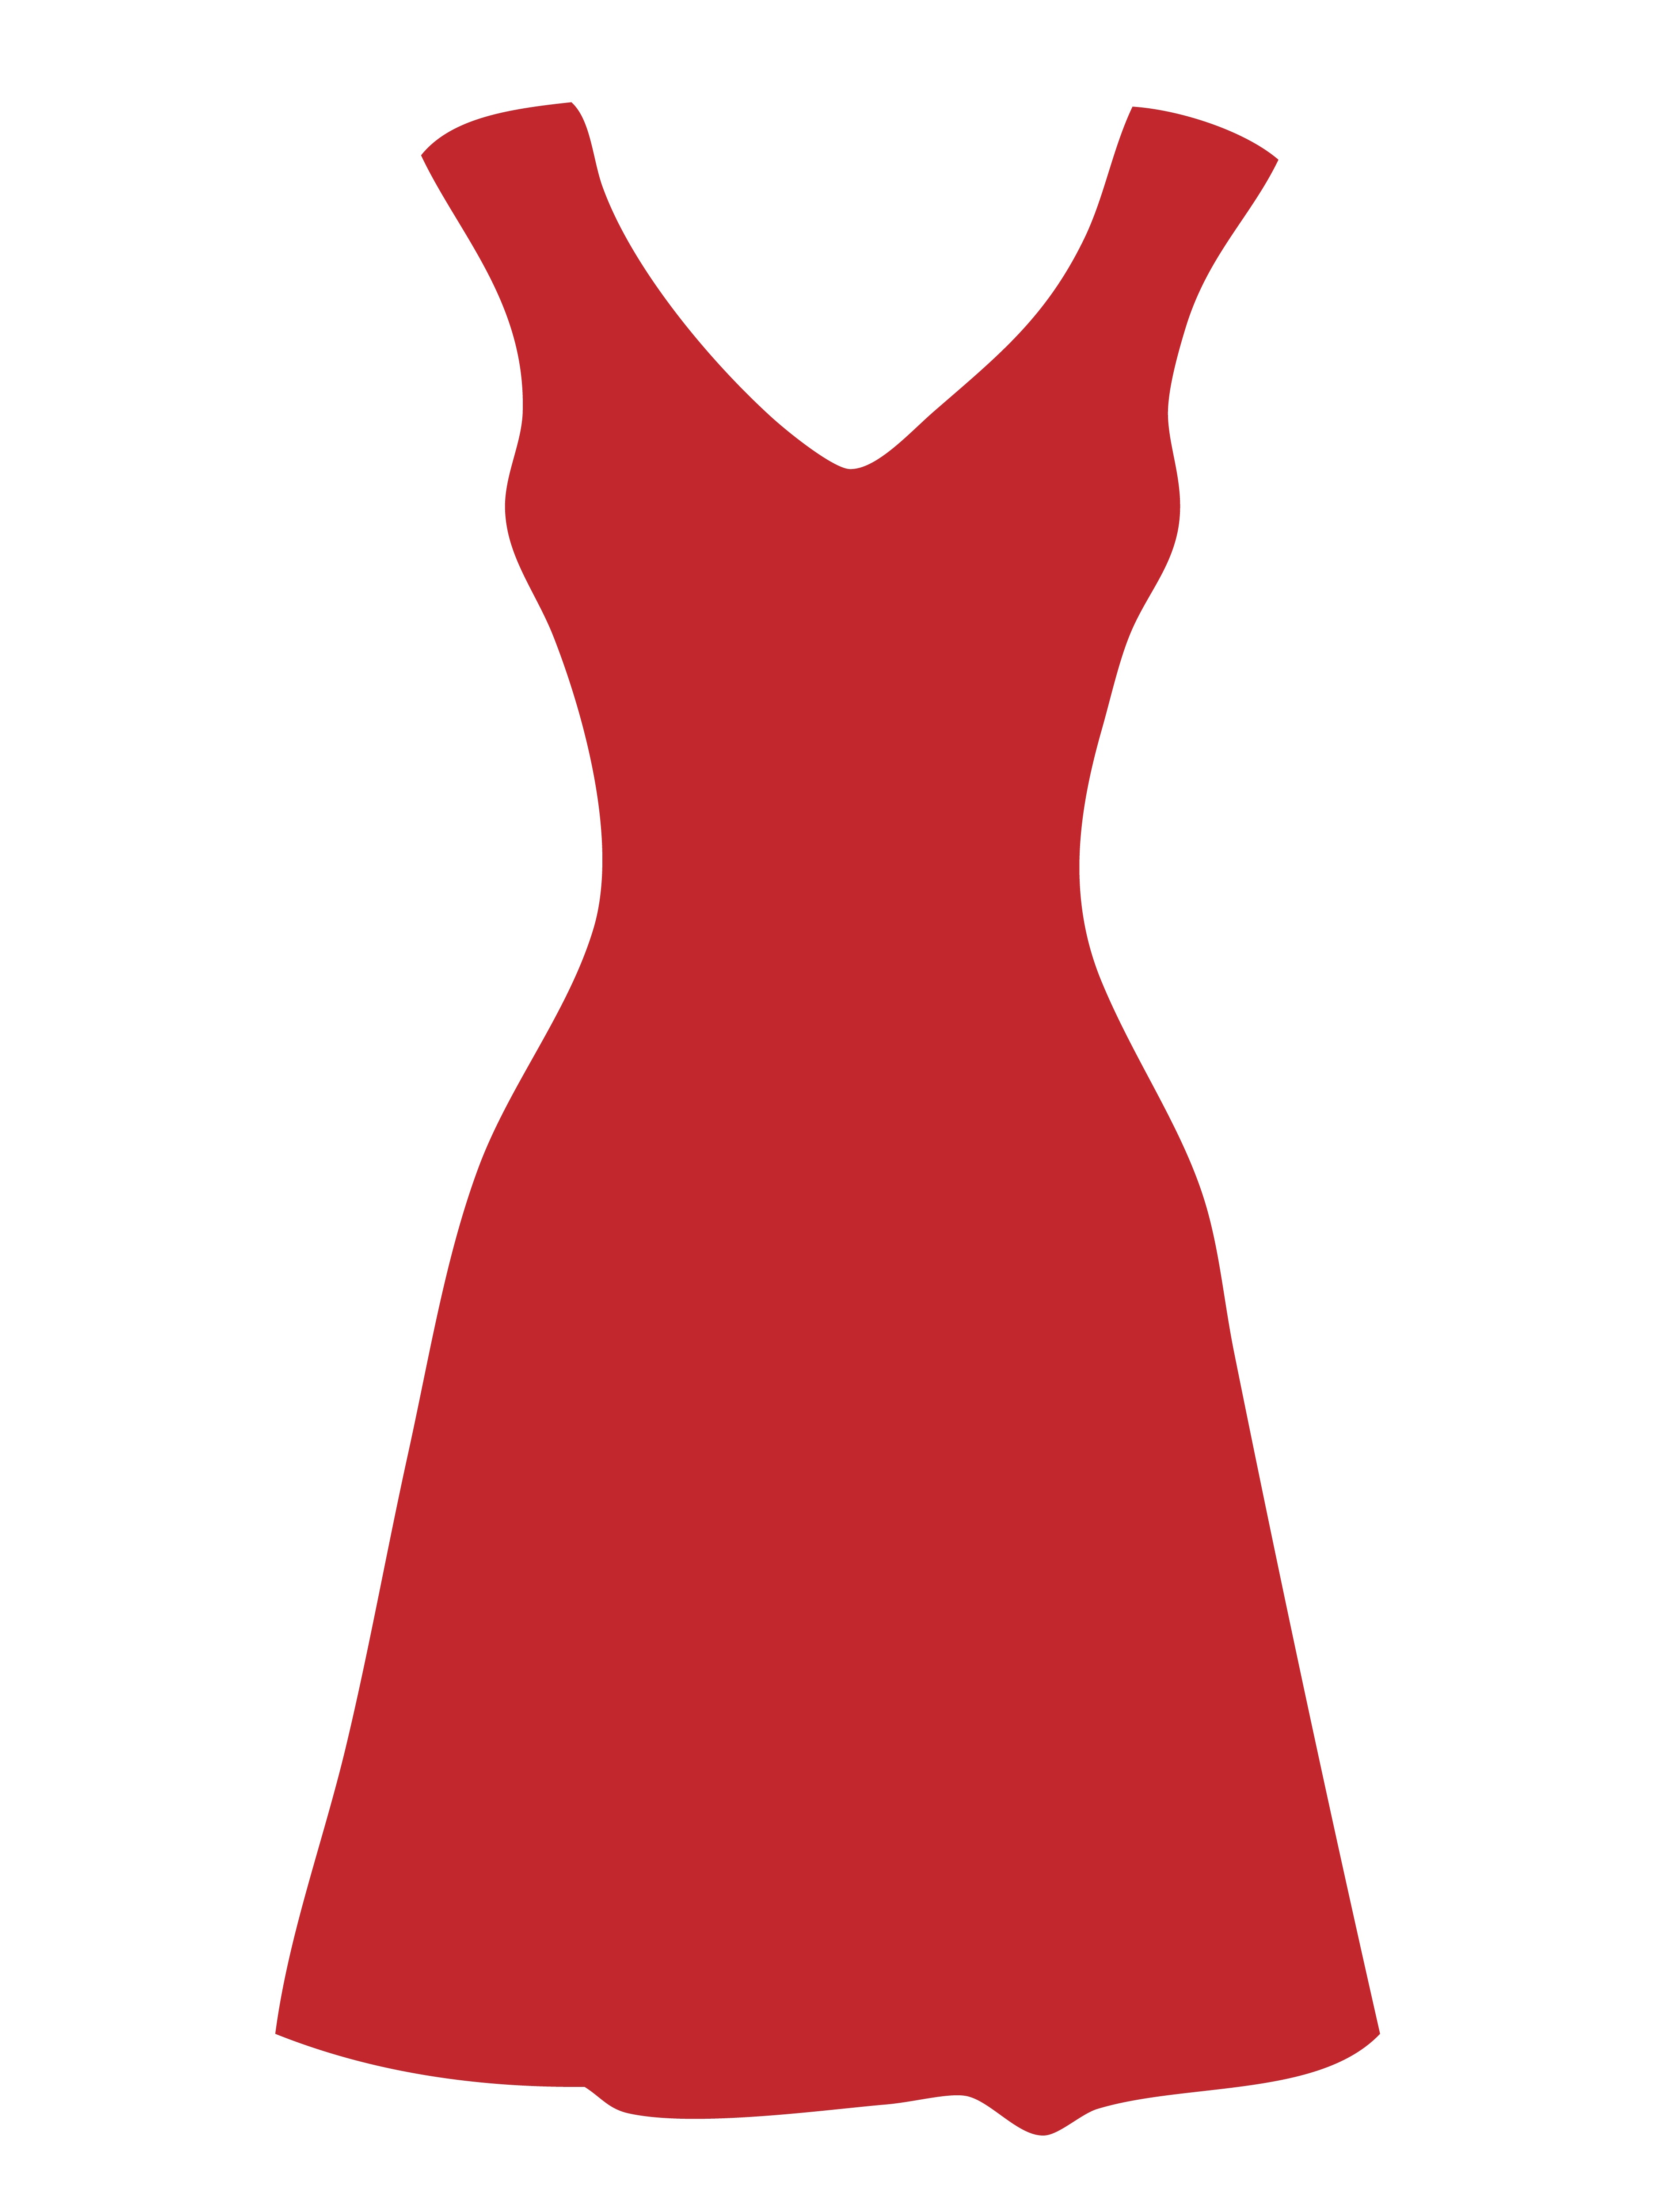 Red dress on a white background free image download